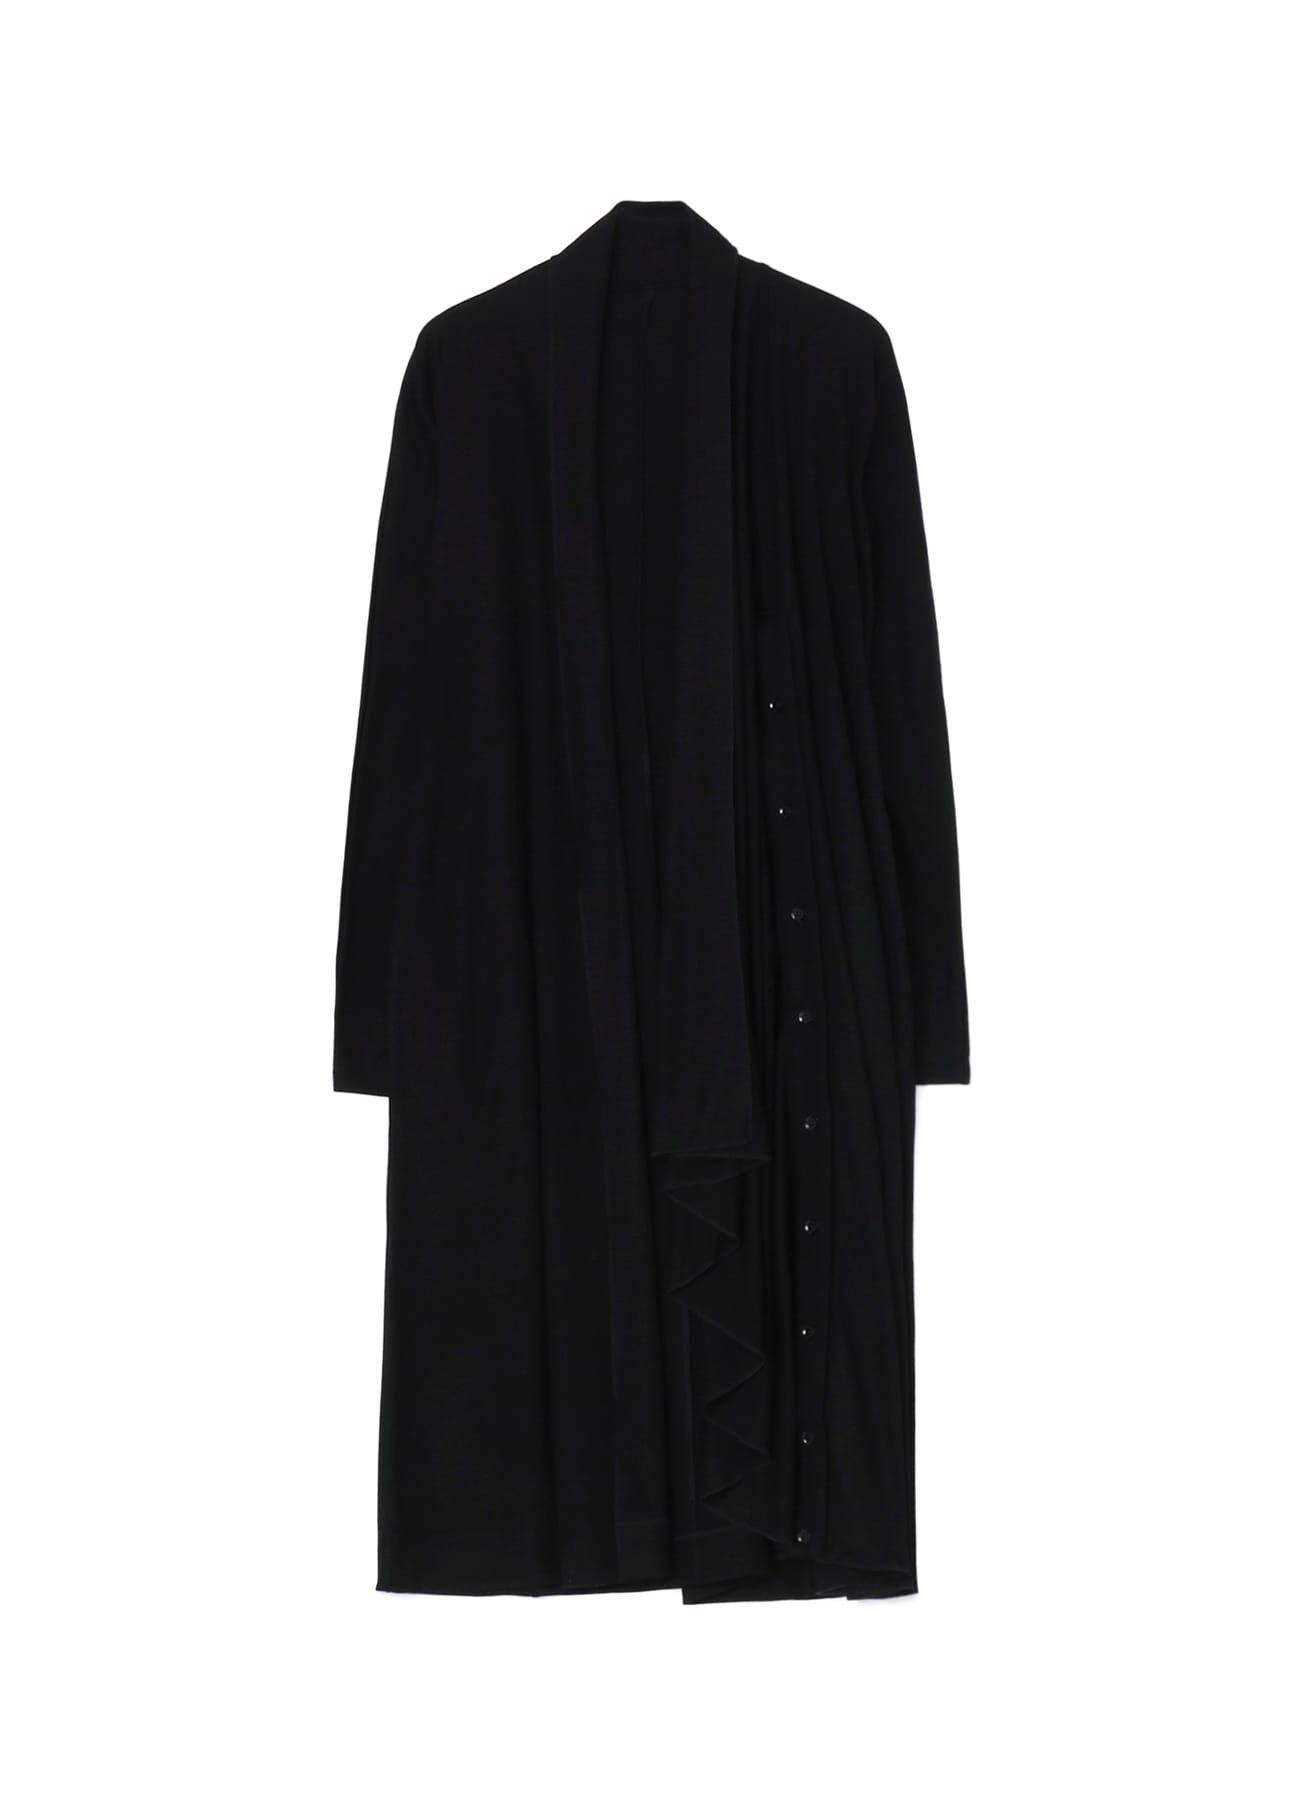 LUMINARY CLEAR SMOOTH STOLE DETAIL LONG CARDIGAN